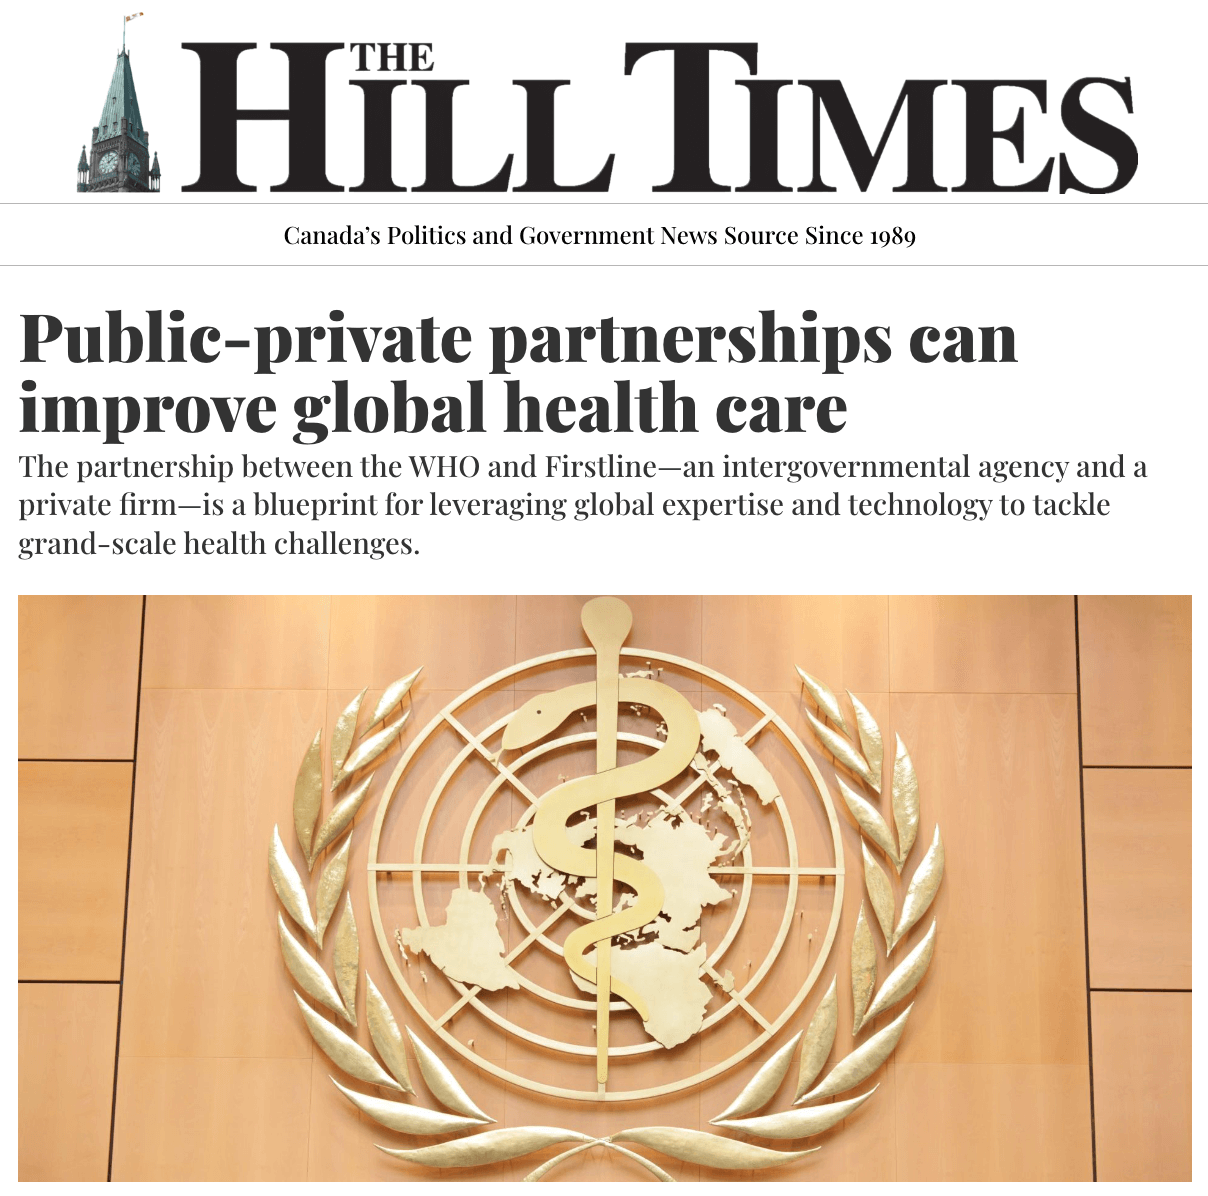 Public-private partnerships can improve global health care